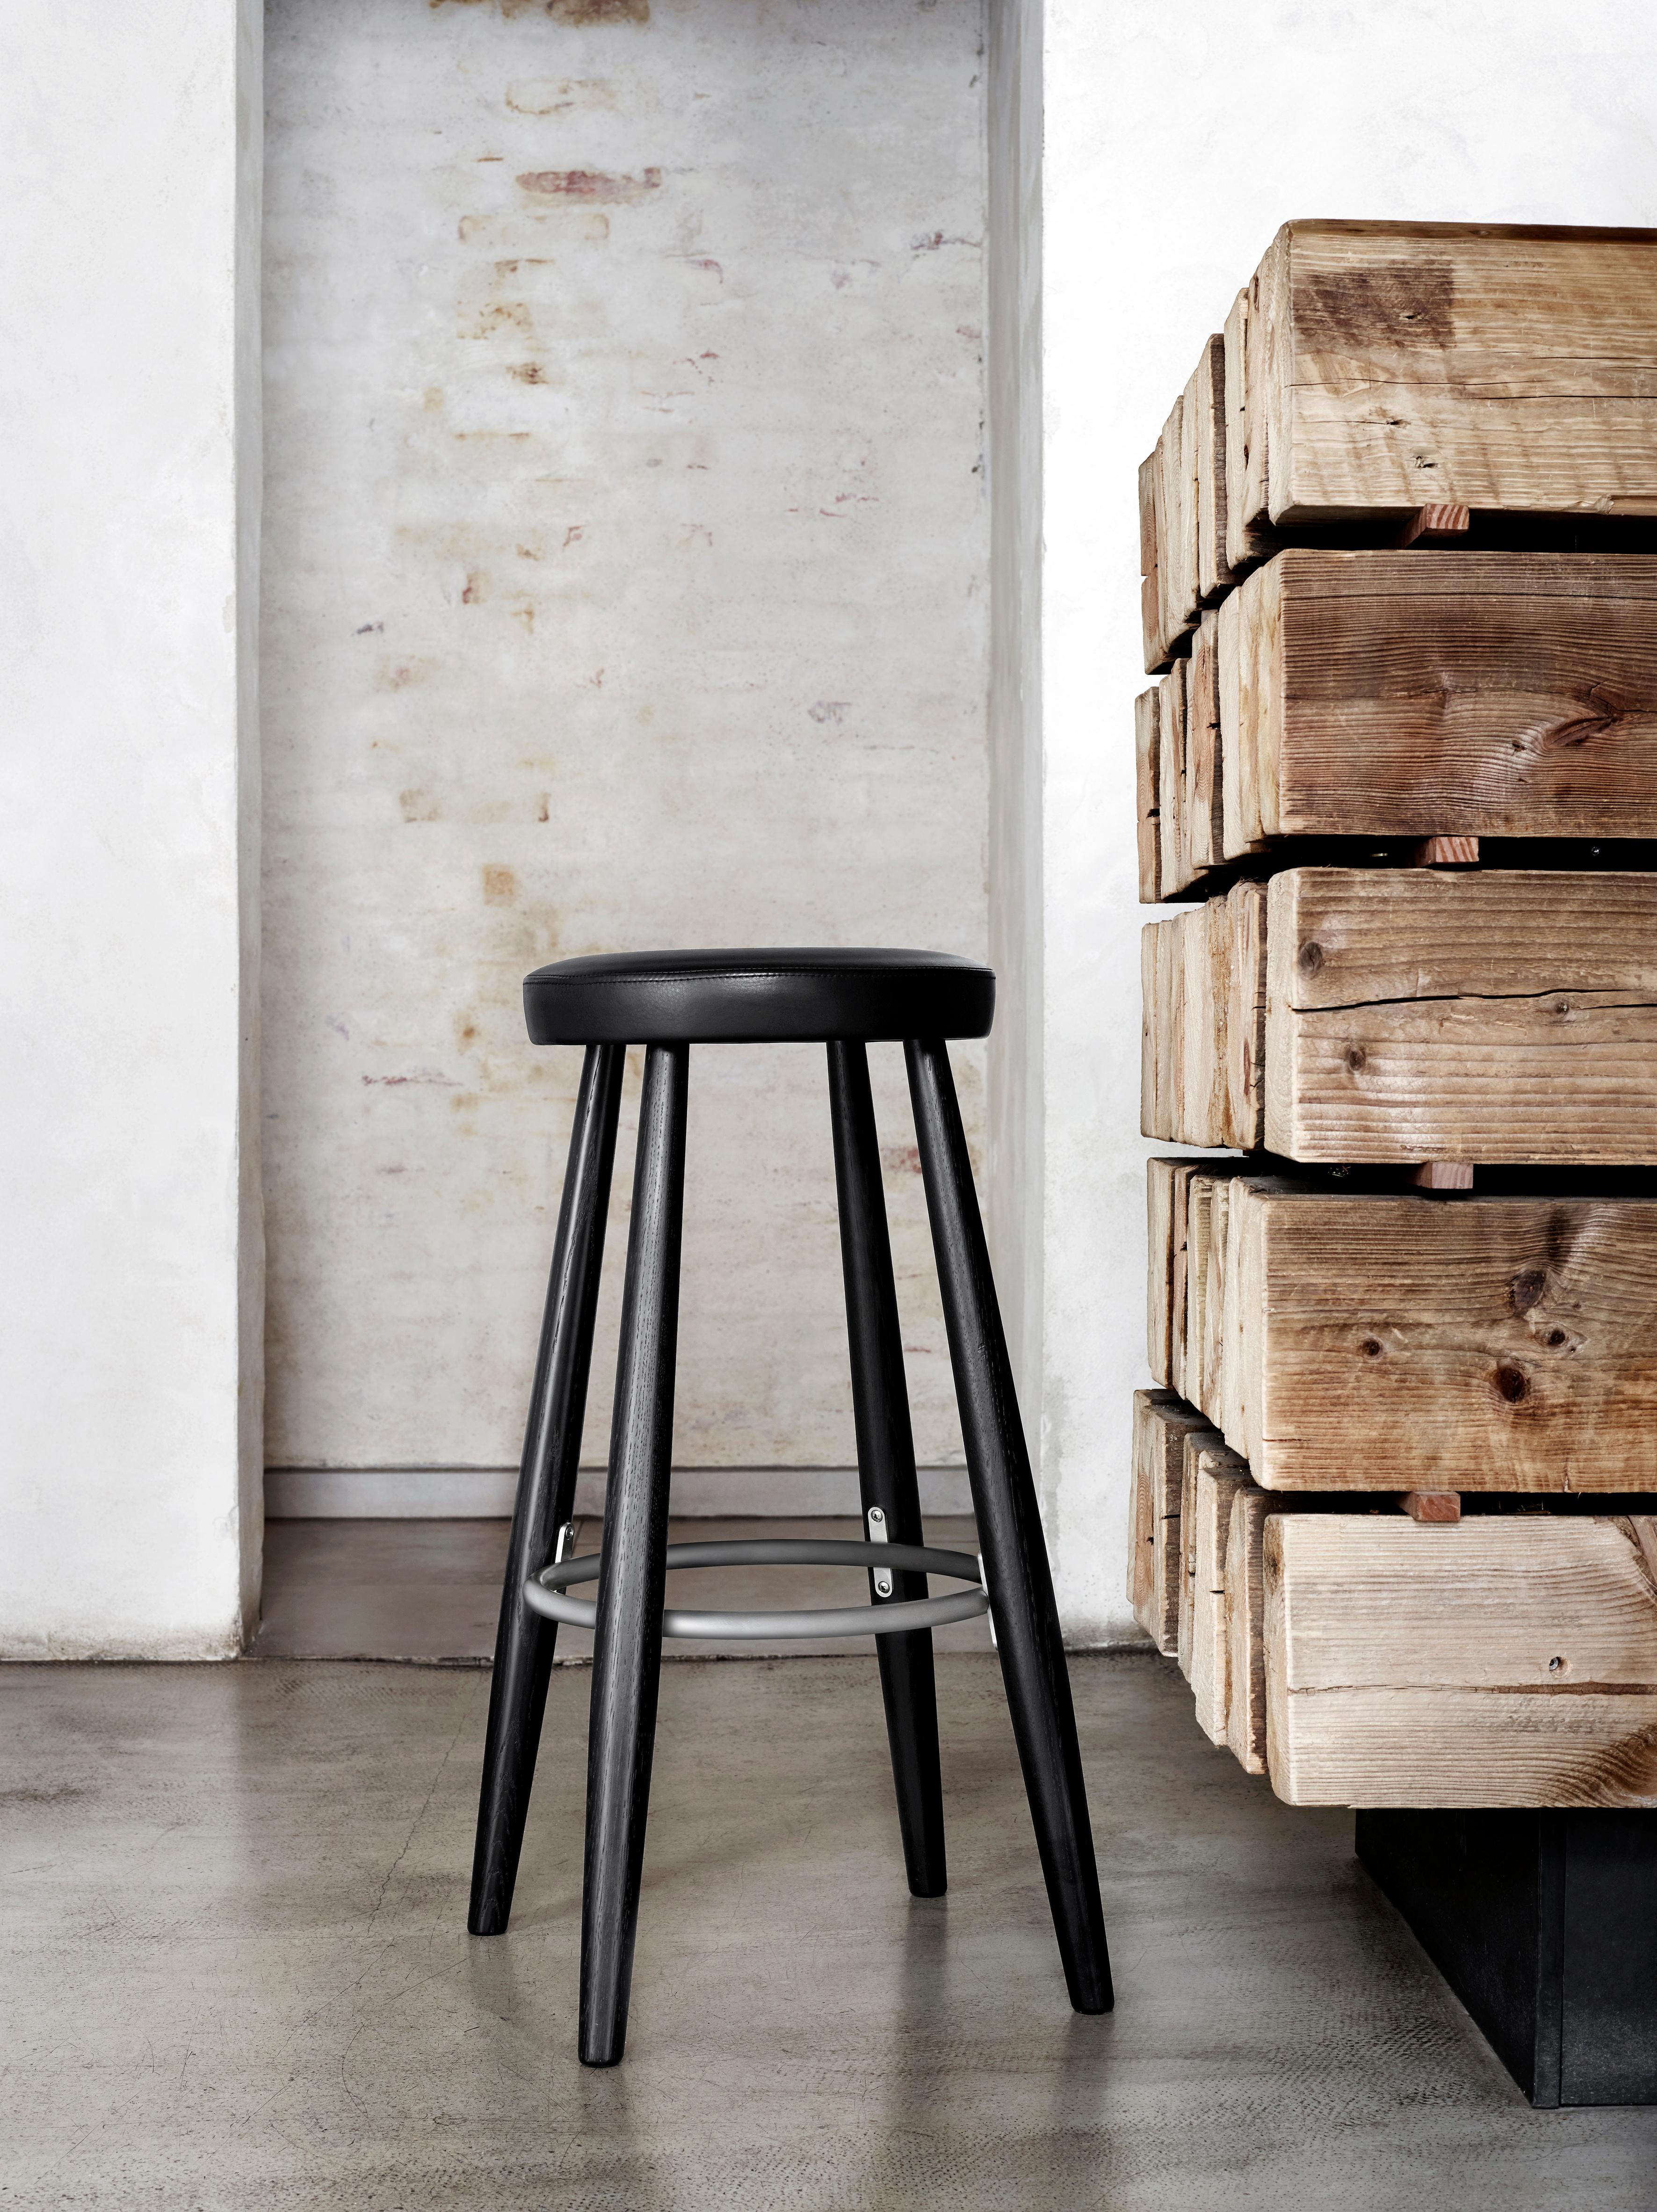 The CH56 barstool in solid wood, leather and stainless steel designed by Hans J. Wegner in 1985 is simple, practical and superbly-crafted for great comfort and an appealing atmosphere in any space. It is also available in a lower version, the CH58